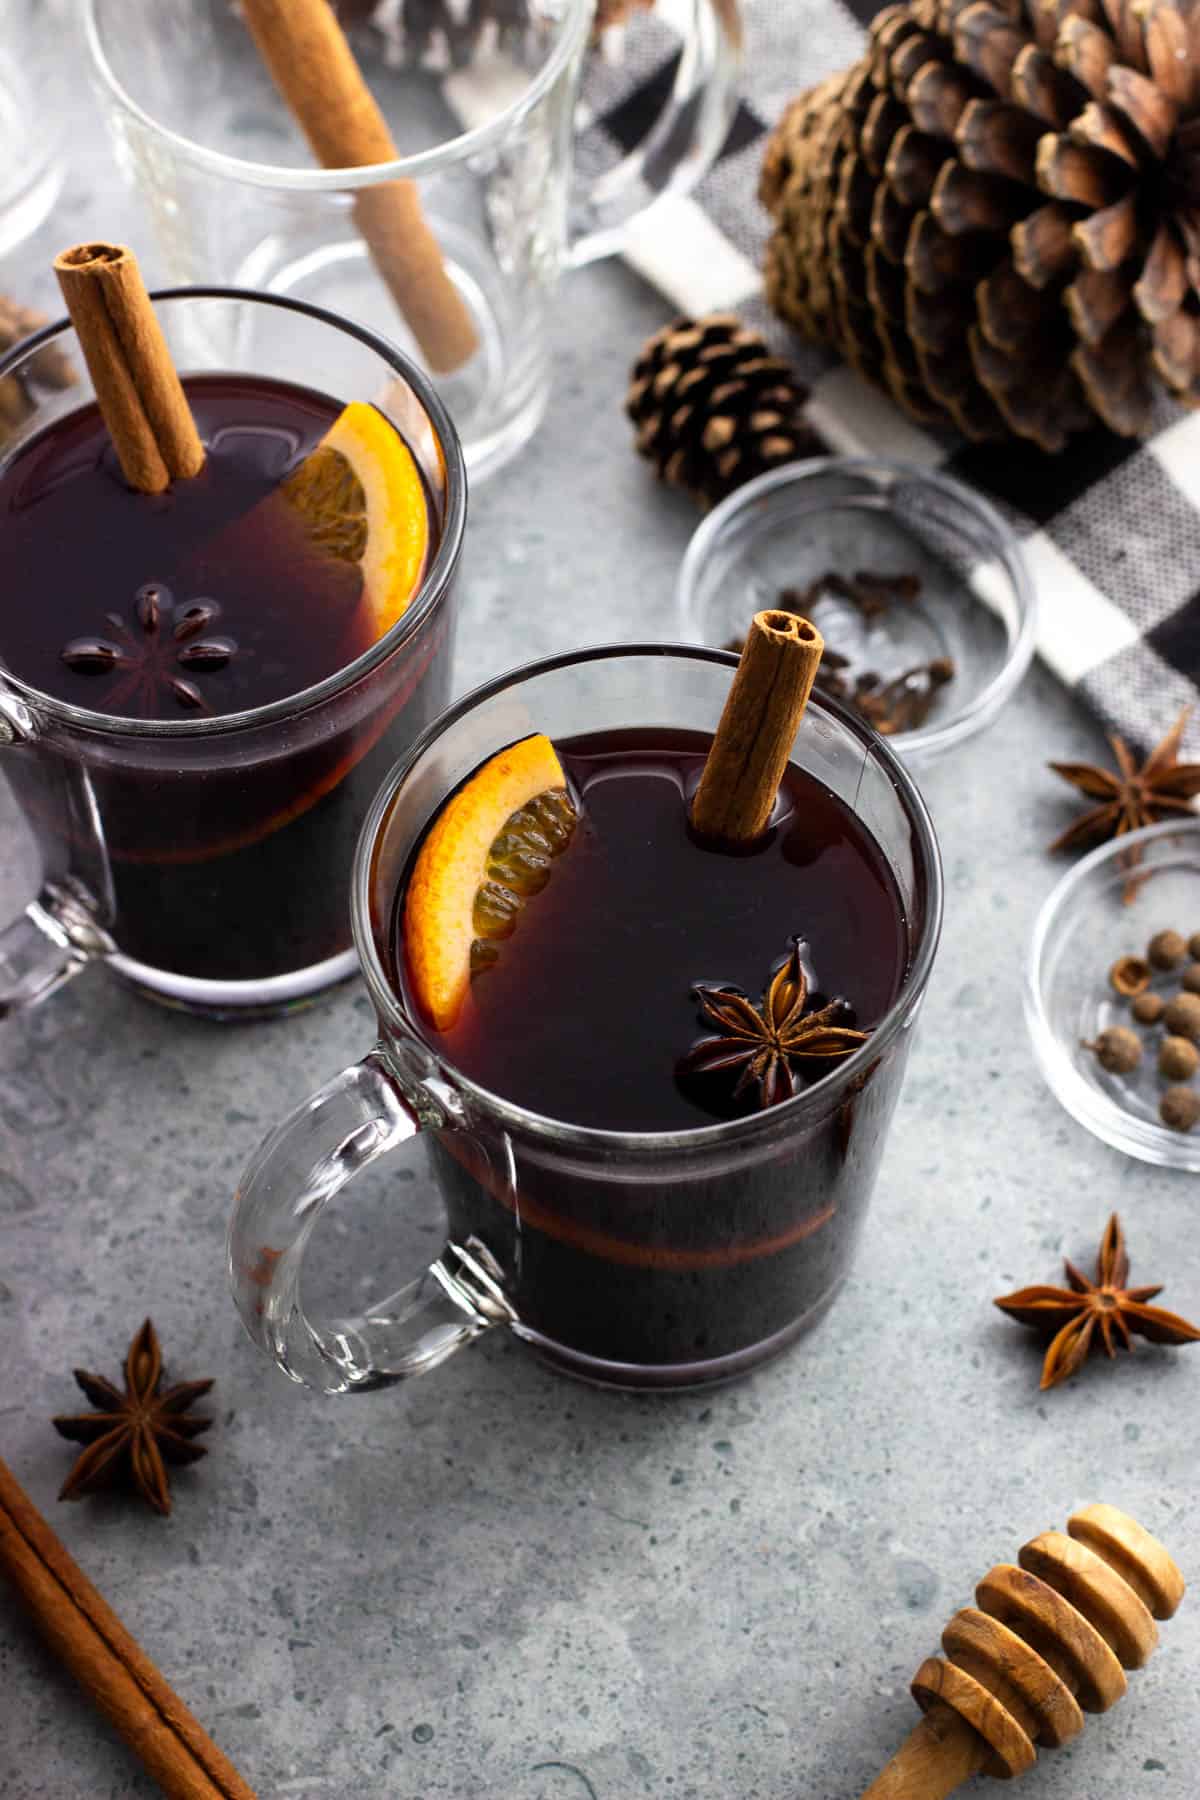 Mugs of Italian mulled wine garnished with cinnamon sticks, orange slices, and star anise pods.